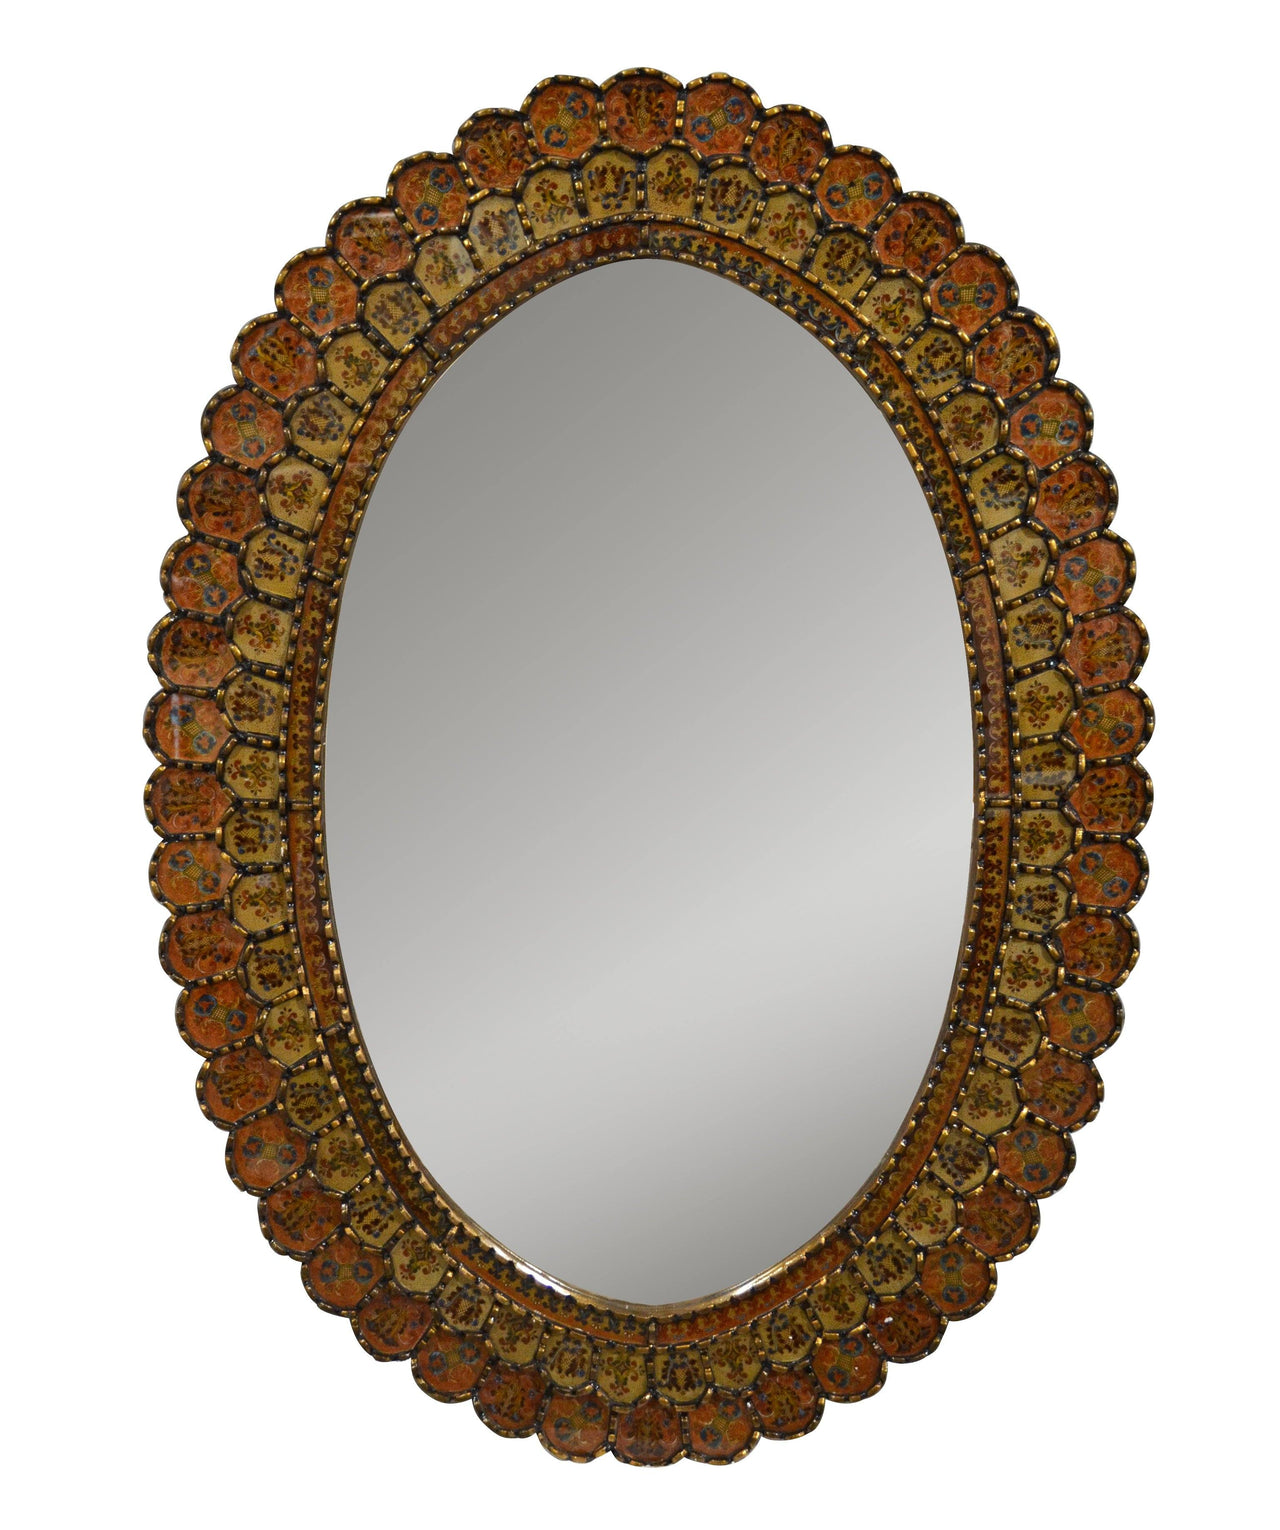 AFD Peruvian Painted Glass Scalloped Mirror Mirrors AFD Multi-Colored 